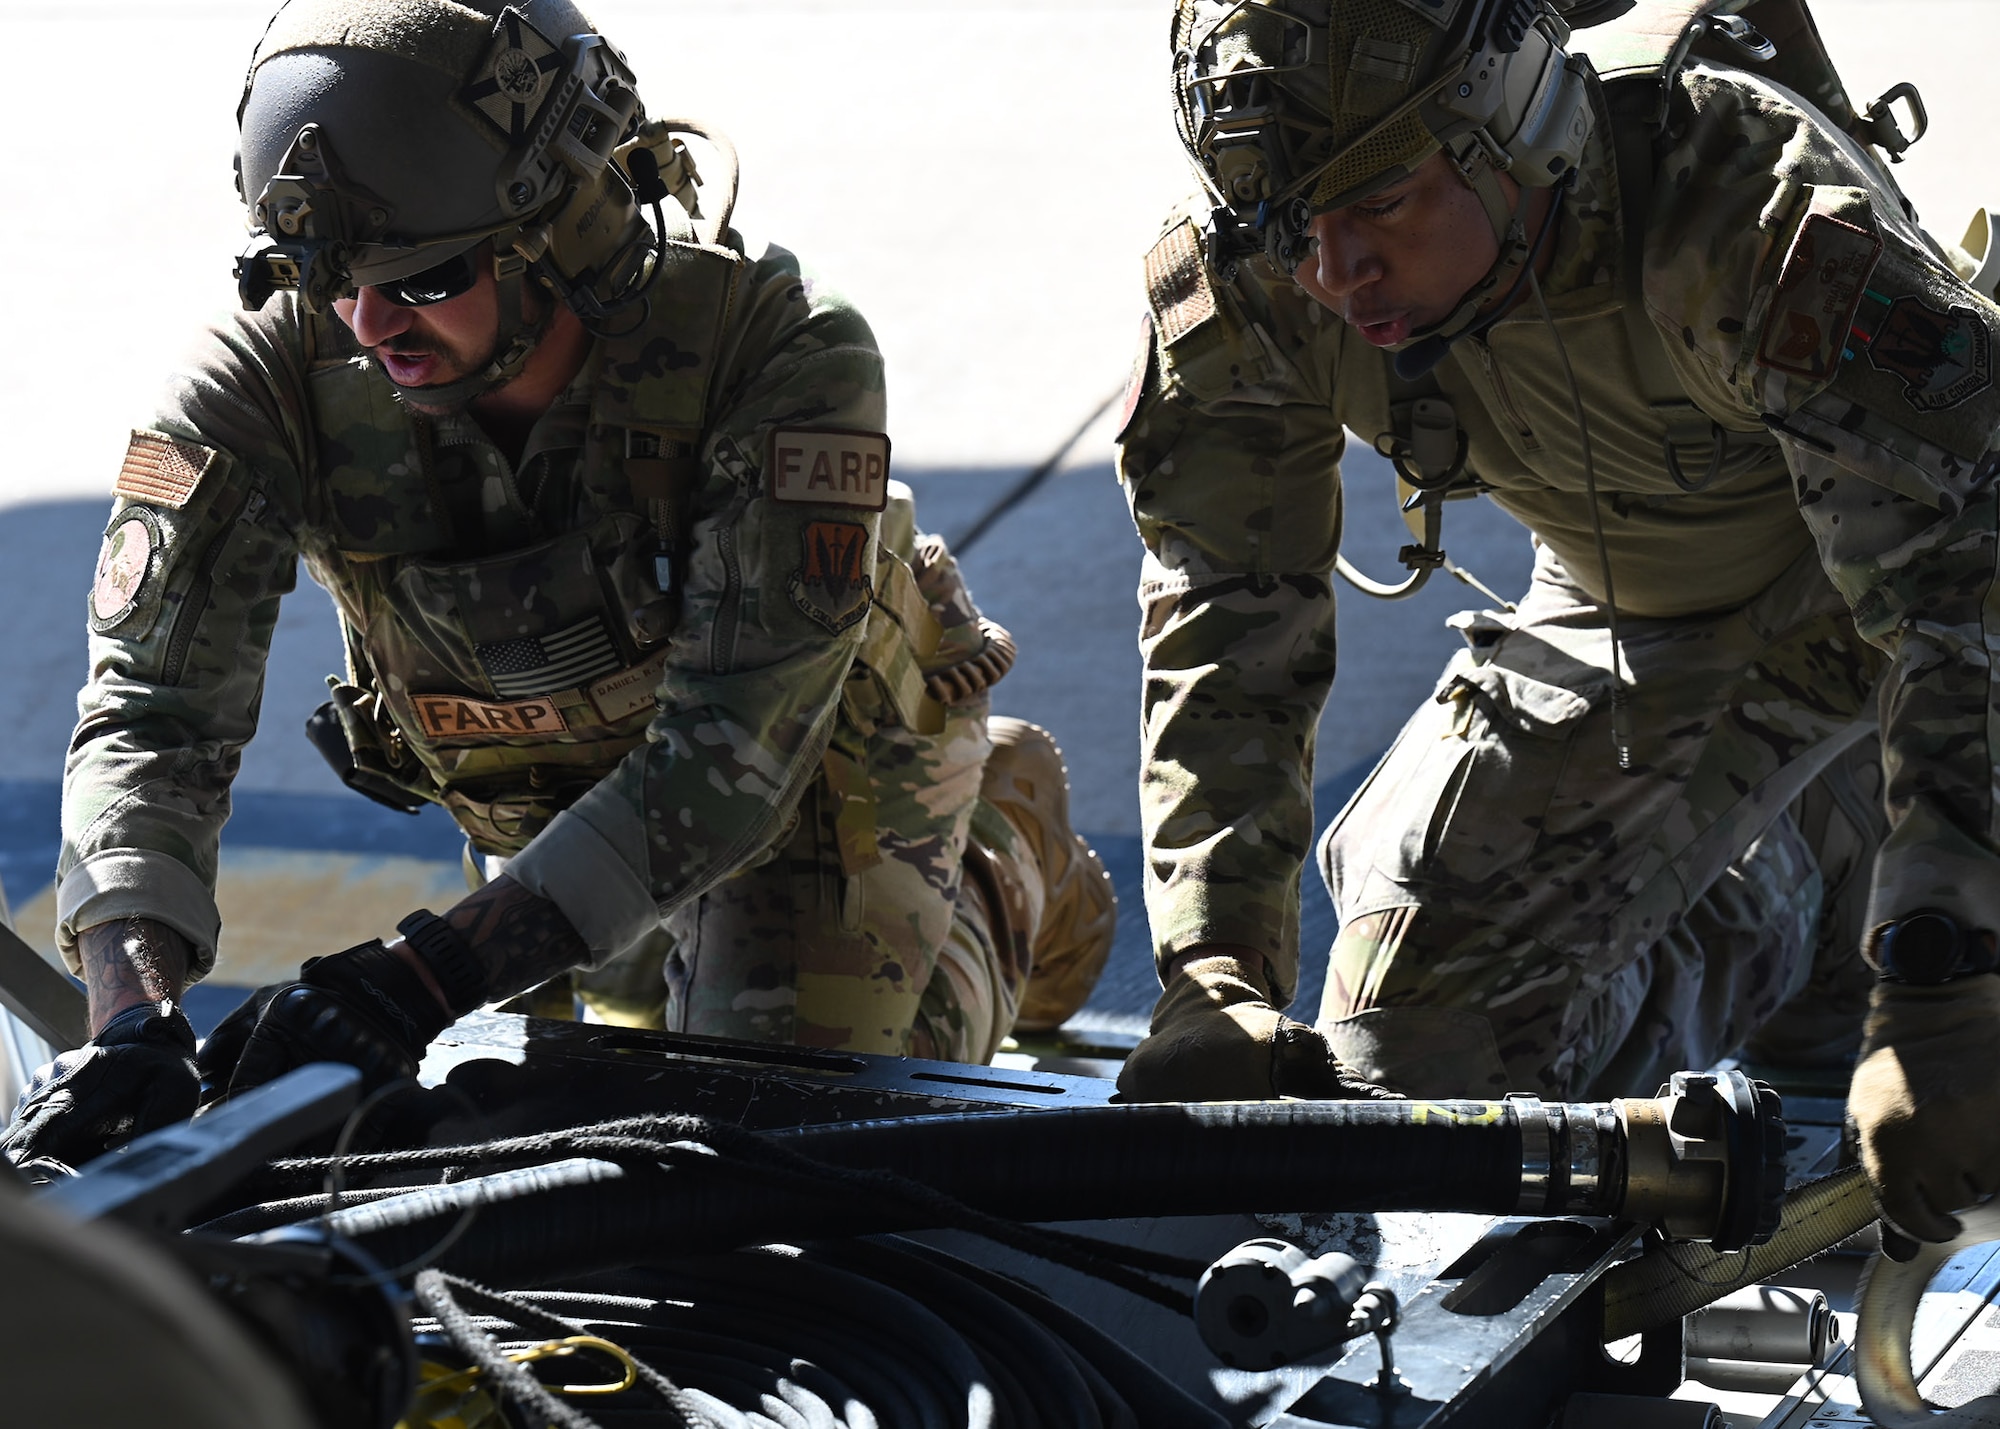 U.S. Air Force Tech. Sgt. Daniel Middaugh, left, 355th Logistics Readiness Squadron forward area refueling point operator, and Master Sgt. Byron Simon, 79th Rescue Squadron loadmaster, secure FARP equipment on an HC-130J Combat King II aircraft during Exercise Agile Angel at Fort Huachuca, Ariz., Feb. 20, 2024. Middaugh and Simon worked together to expedite the operational tempo, which complicates or negates adversary response. (U.S. Air Force photo by Staff Sgt. Abbey Rieves)